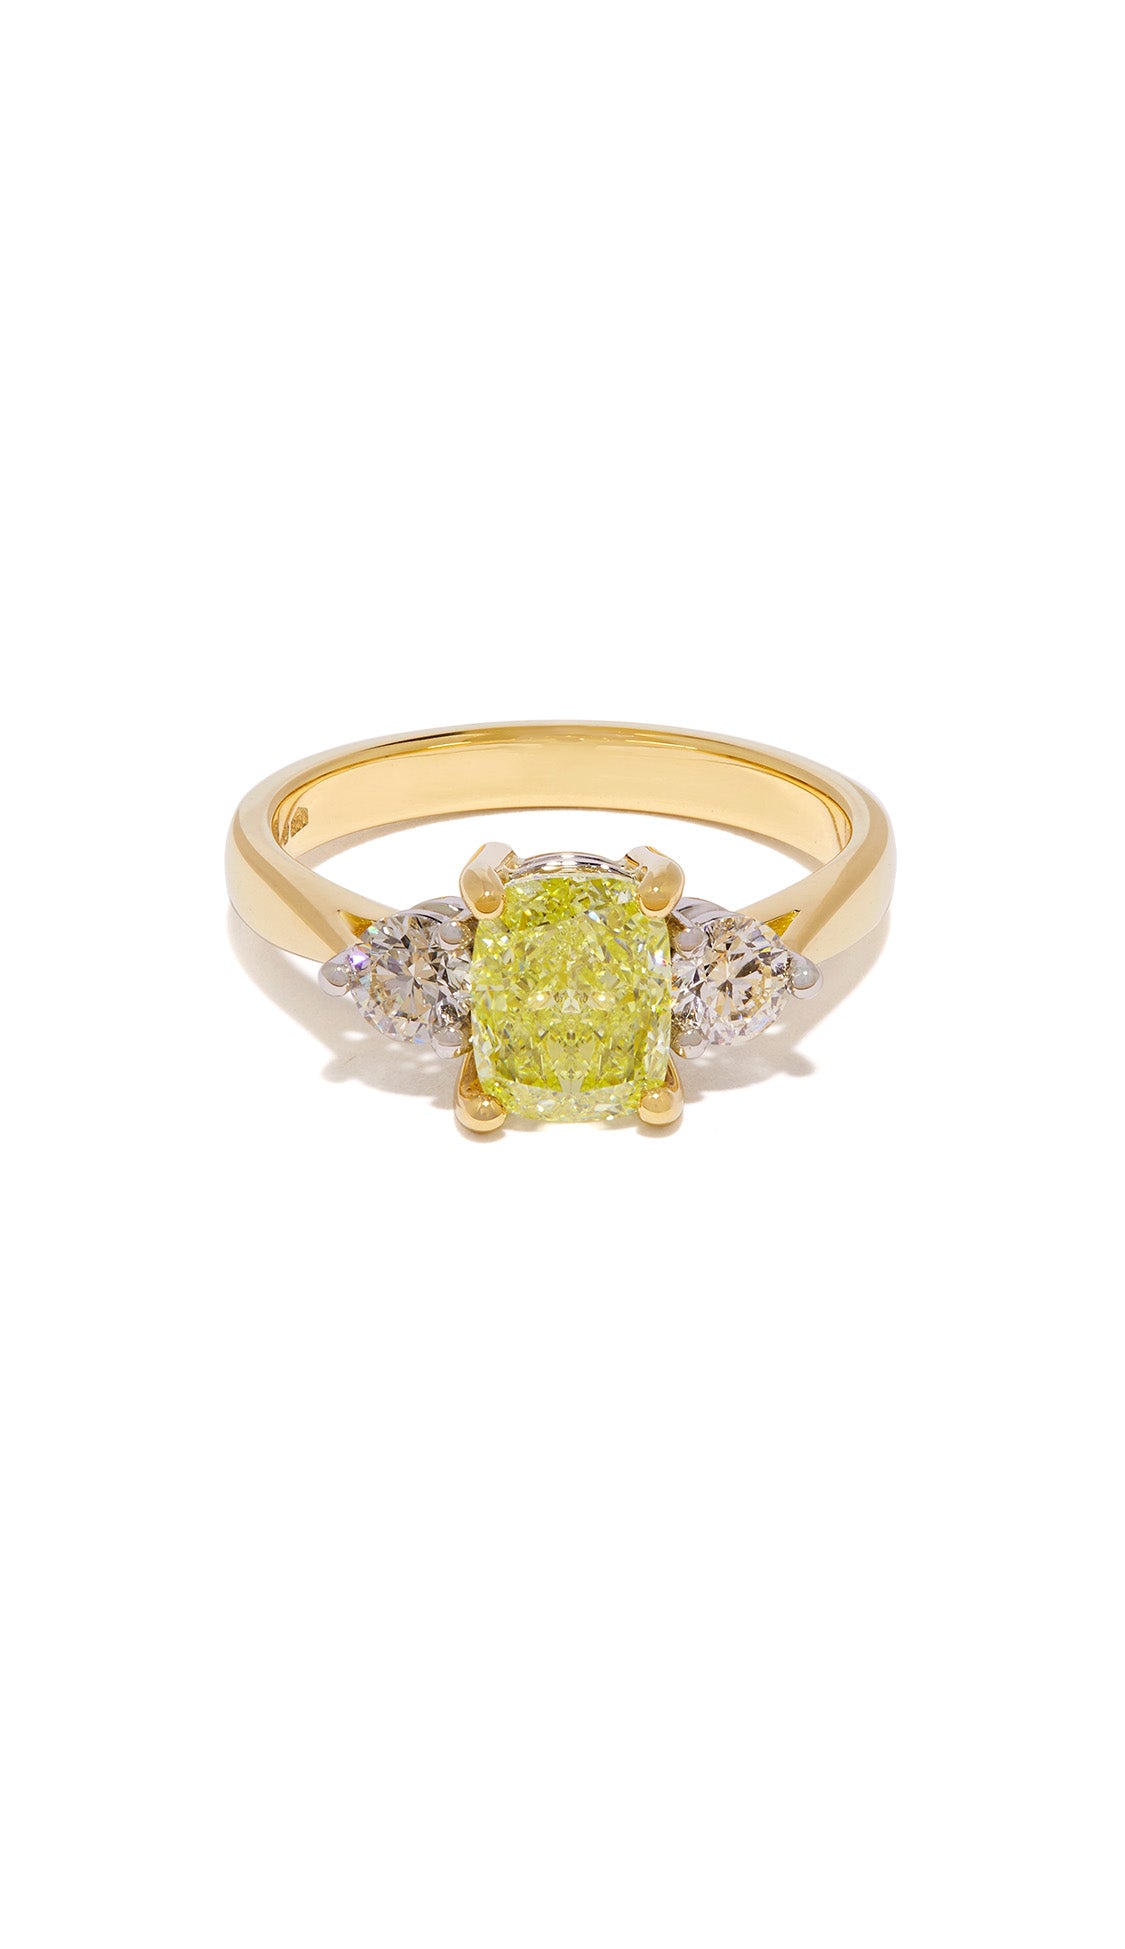 Trilogy yellow diamond ring set in 18ct yellow gold and platinum lying on white background with shadow